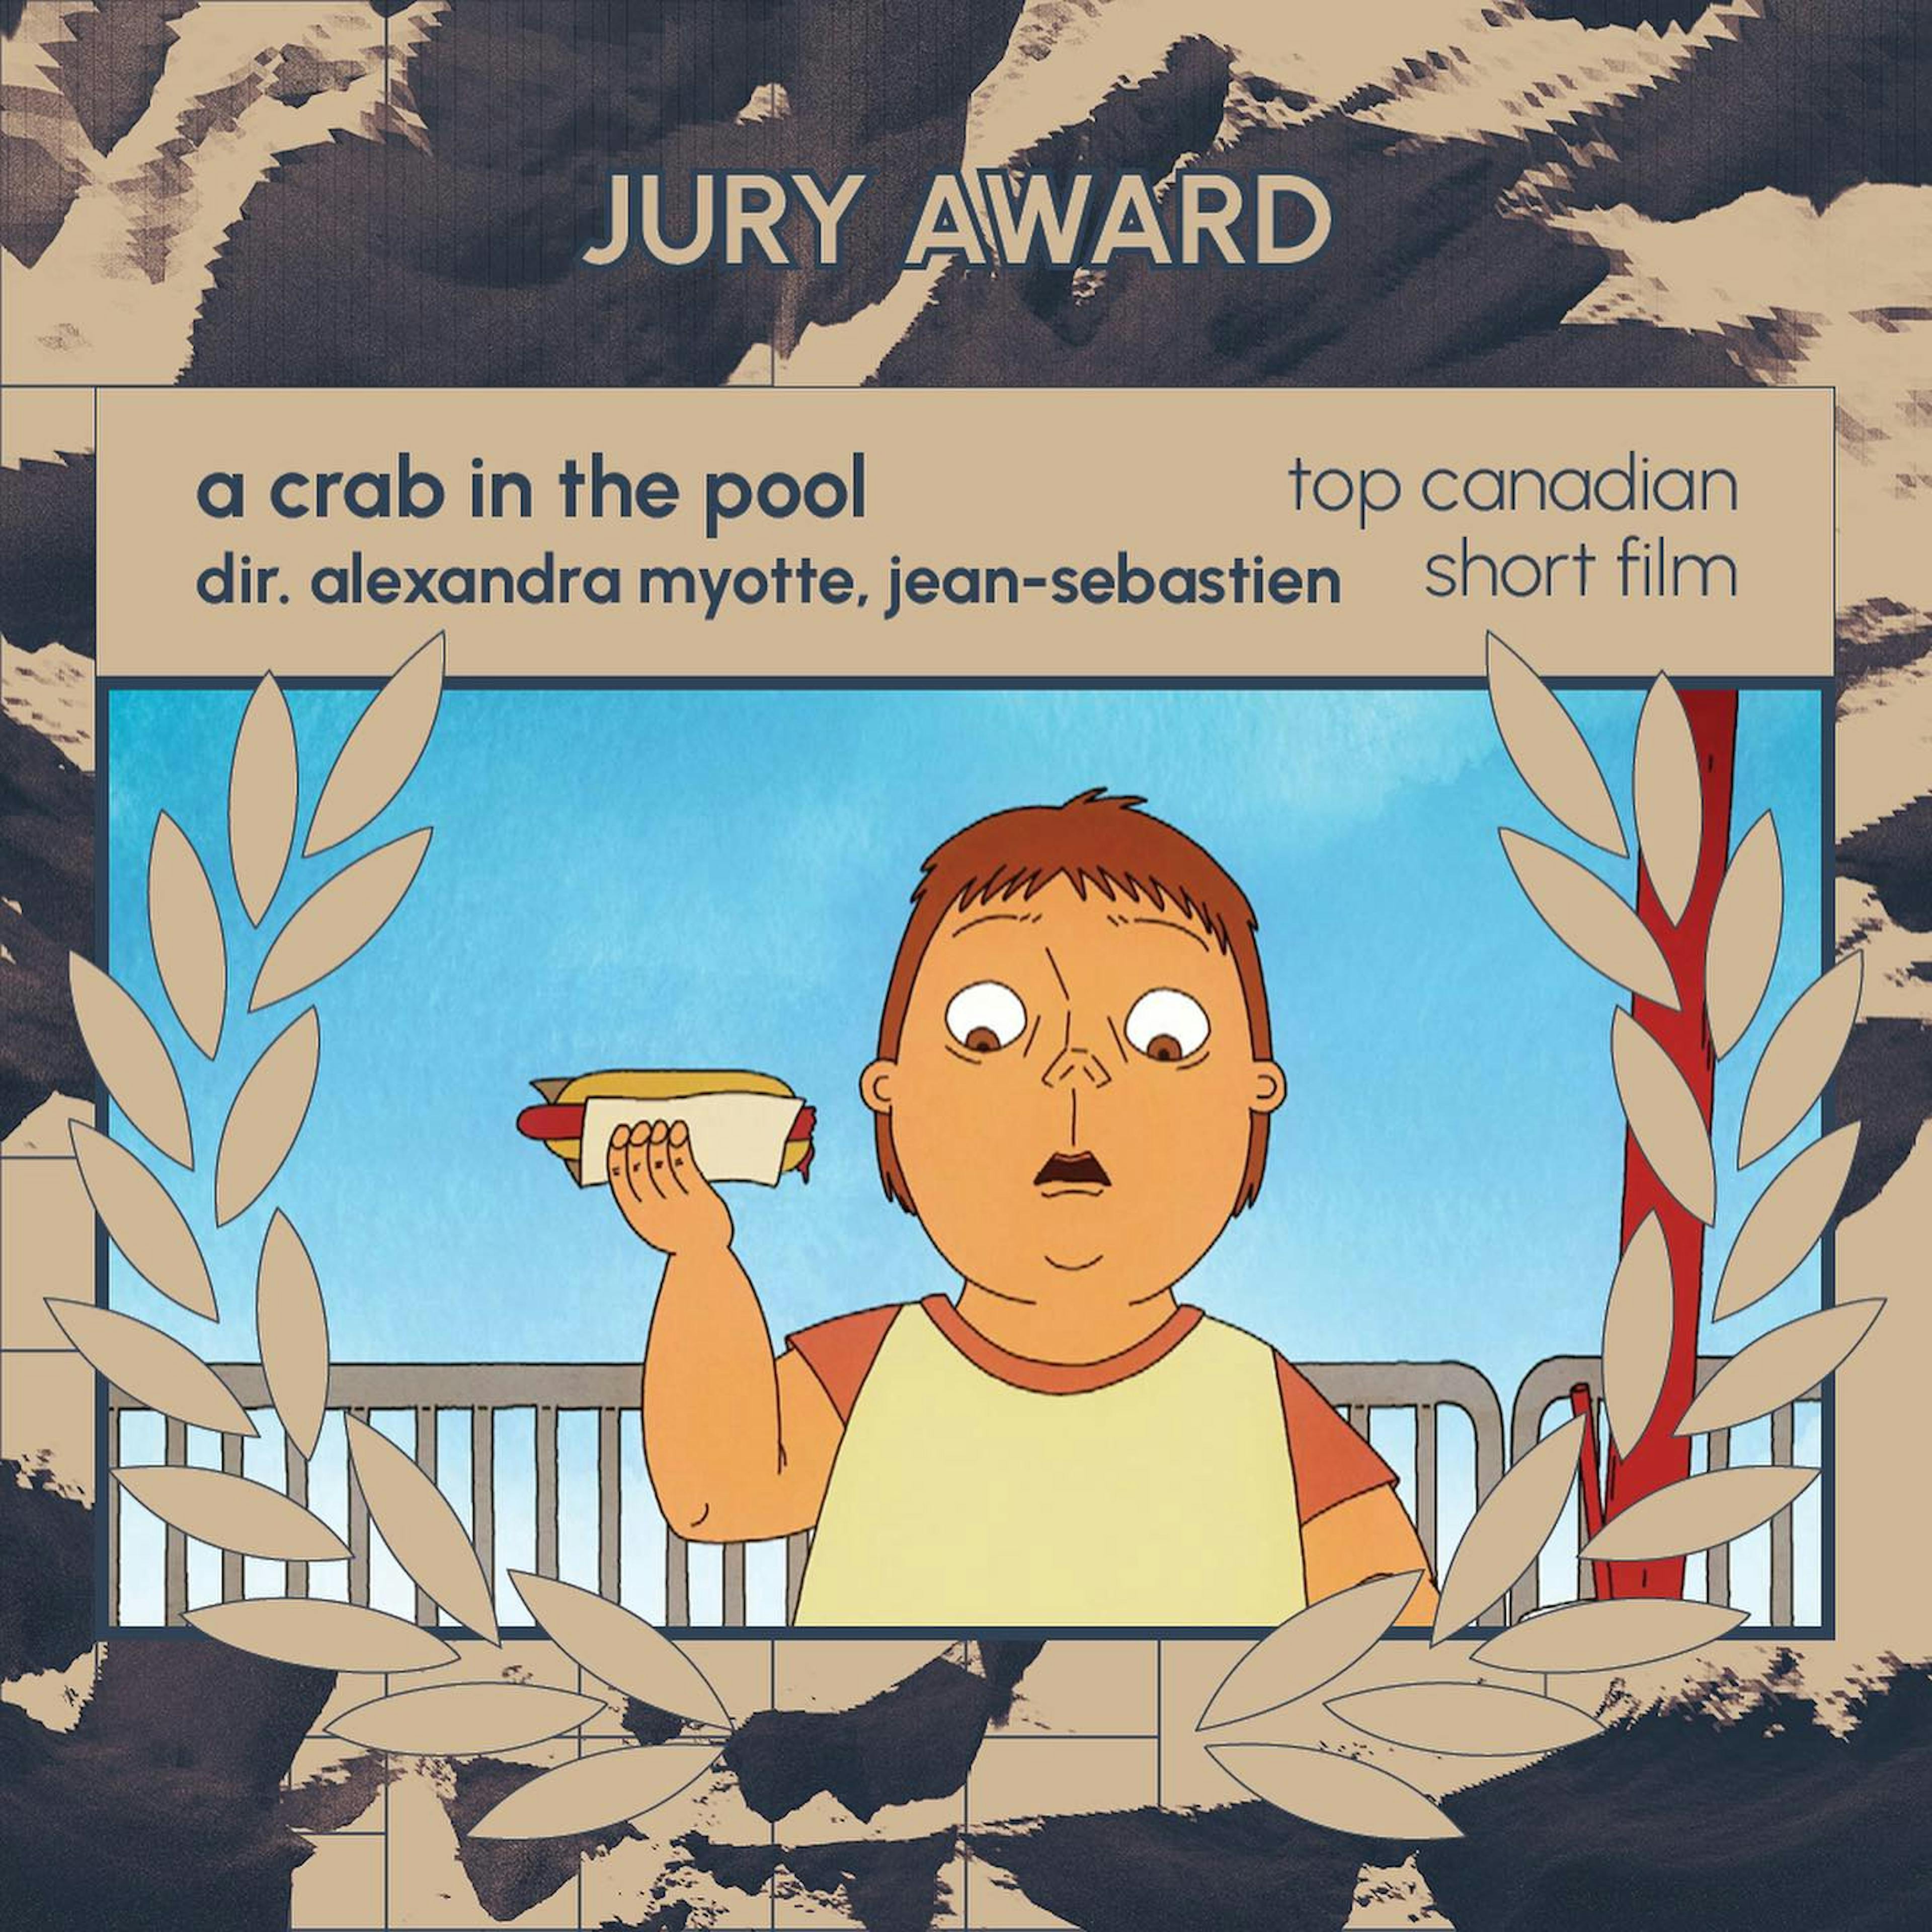 JURY AWARD for GIRAF19 - a crab in the pool dir. alexandra myotte, jean-sebastien TOP CANADIAN SHORT FILM.

Shows a screenshot of a boy holding a hot dog and looking lightly shocked